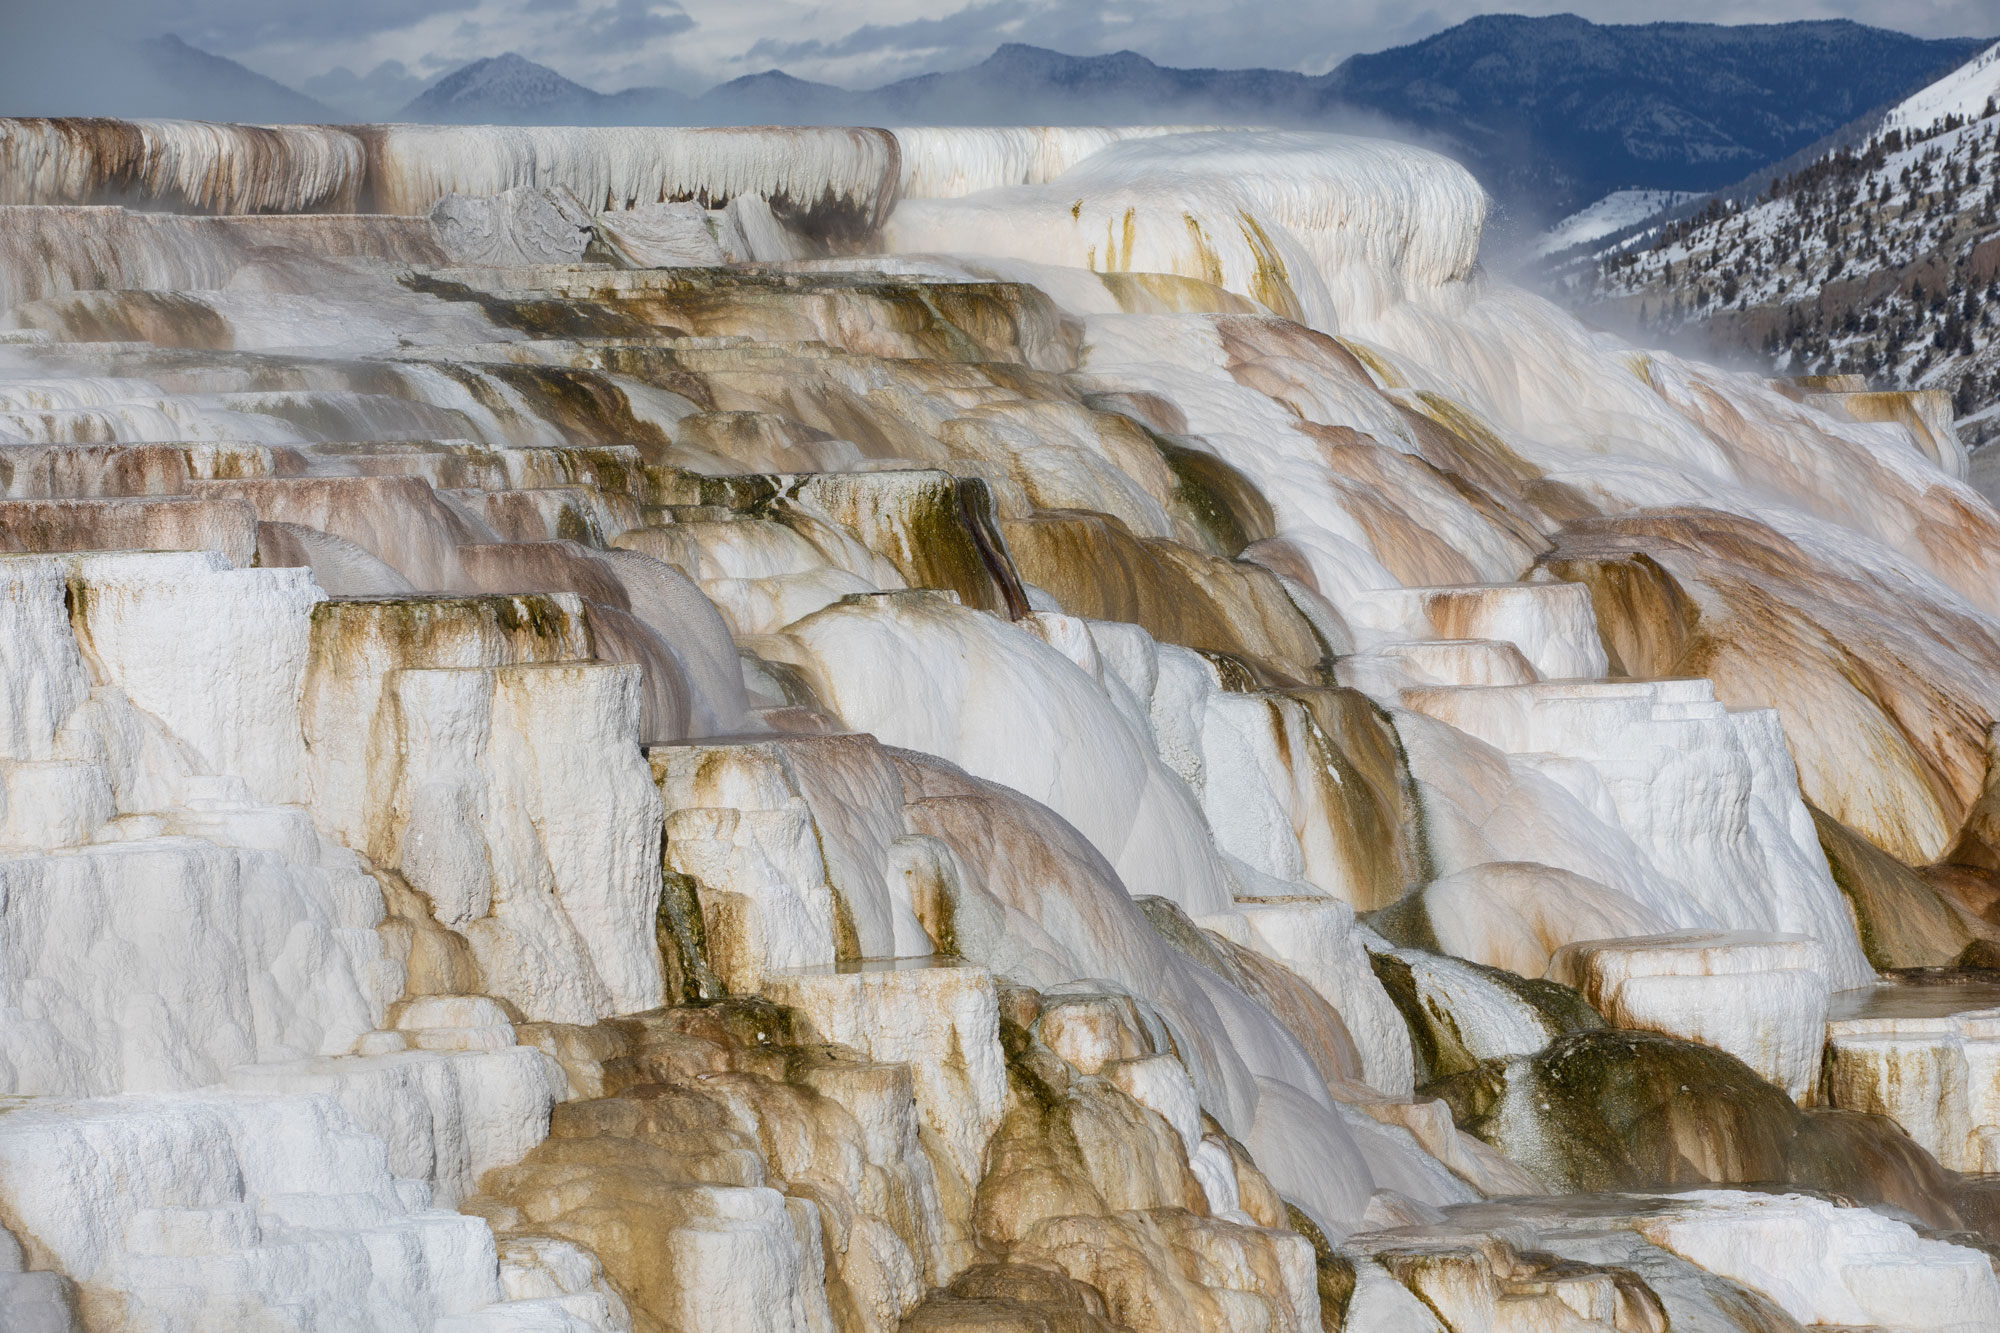 Photograph of Mammoth hot springs, Yellowstone National Park. The photo shows a hill made up of white and brown minerals with tiered levels; the top of the hill is flat. Steam is rising off the hill.